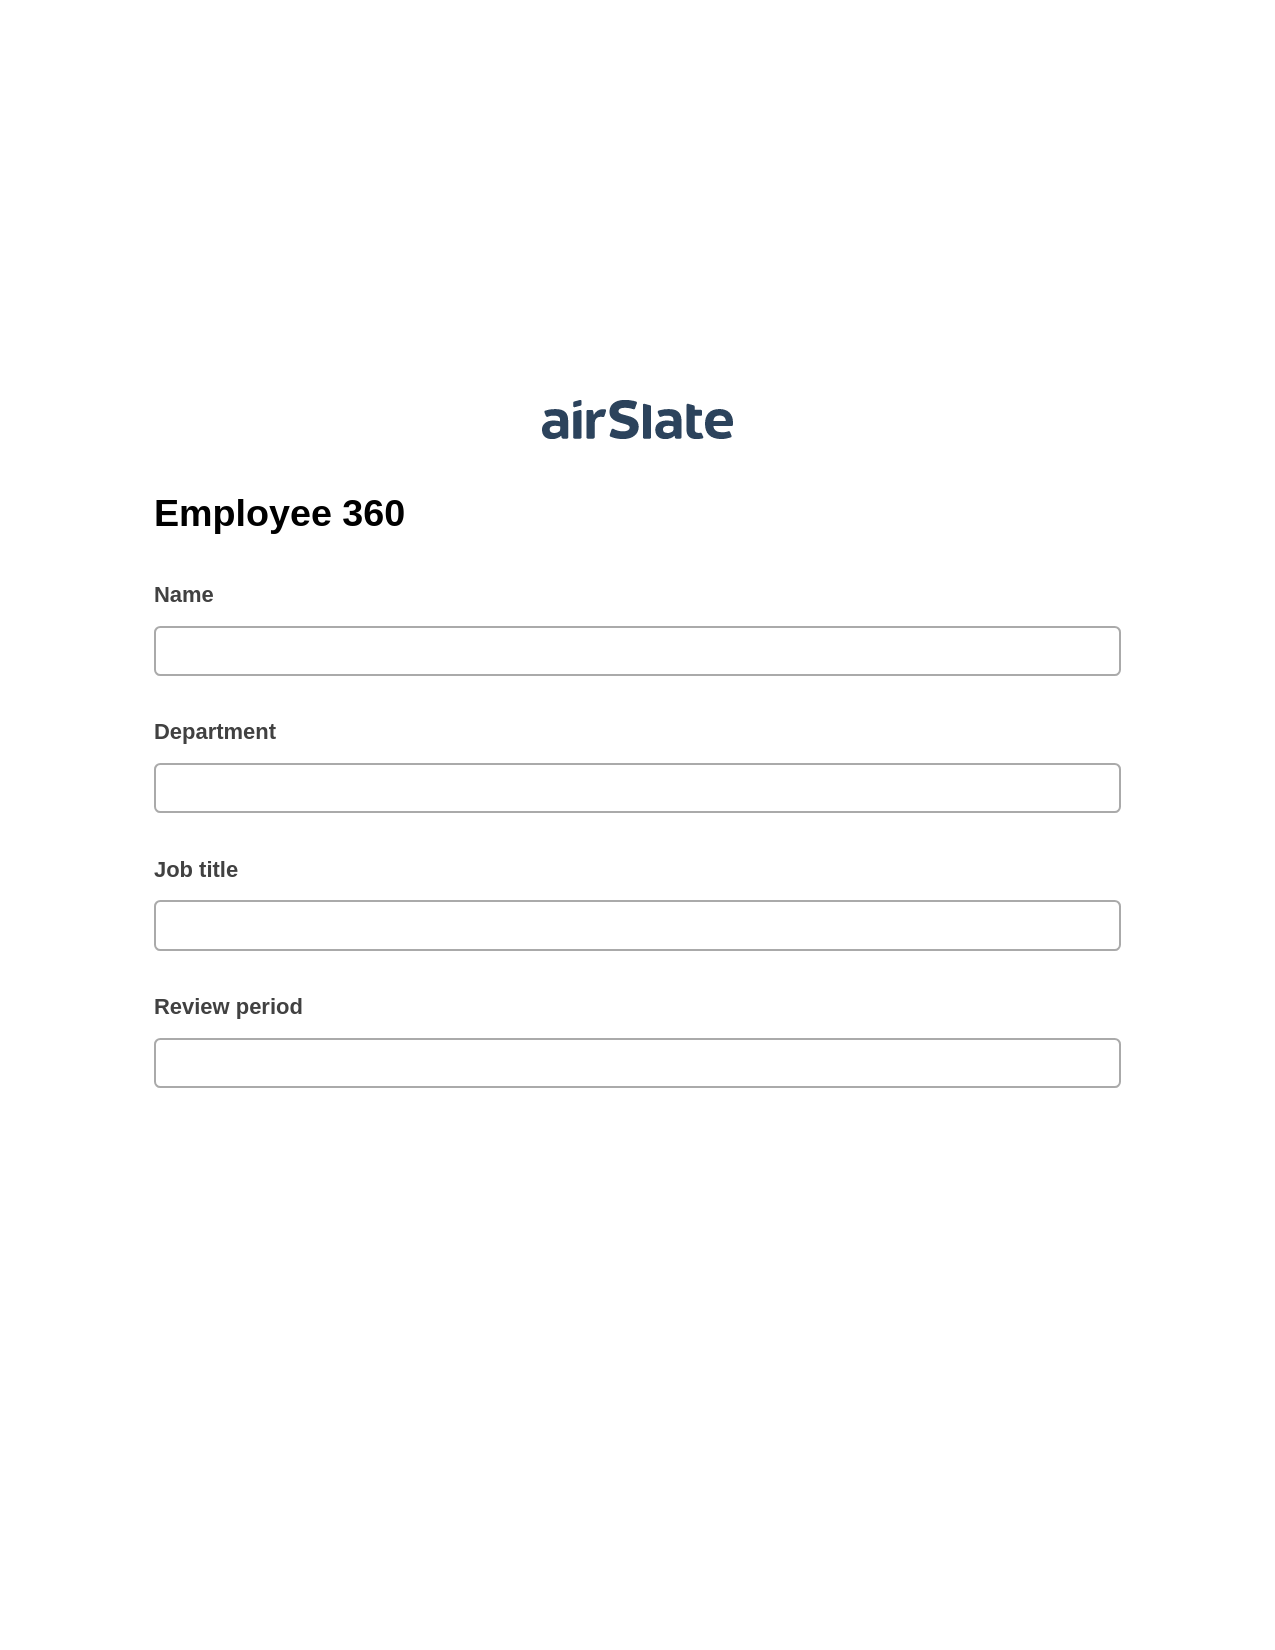 Employee 360 Prefill from NetSuite records, Roles Reminder Bot, Archive to Dropbox Bot